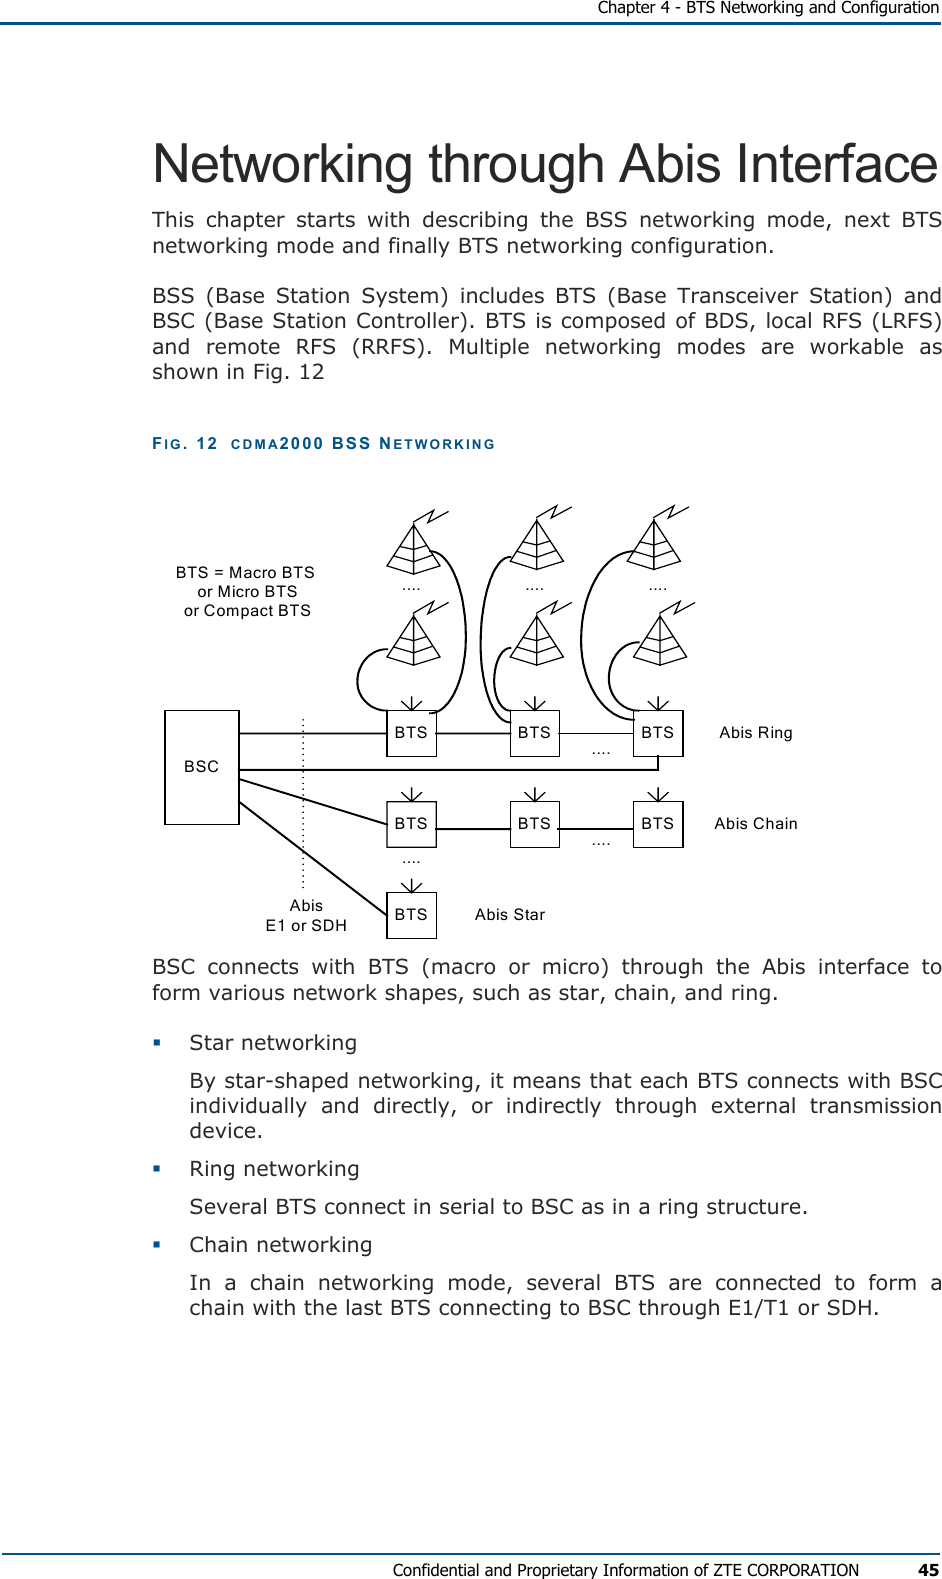   Chapter 4 - BTS Networking and Configuration Confidential and Proprietary Information of ZTE CORPORATION 45 Networking through Abis Interface This chapter starts with describing the BSS networking mode, next BTS networking mode and finally BTS networking configuration. BSS (Base Station System) includes BTS (Base Transceiver Station) and BSC (Base Station Controller). BTS is composed of BDS, local RFS (LRFS) and remote RFS (RRFS). Multiple networking modes are workable as shown in Fig. 12 FIG. 12  CDMA2000 BSS NETWORKING  BSCBTS = Macro BTS or Micro BTS or Compact BTSBTS....BTS BTS BTS.... .... ........BTS BTS BTS....AbisE1 or SDH Abis StarAbis ChainAbis Ring BSC connects with BTS (macro or micro) through the Abis interface to form various network shapes, such as star, chain, and ring.    Star networking By star-shaped networking, it means that each BTS connects with BSC individually and directly, or indirectly through external transmission device.    Ring networking Several BTS connect in serial to BSC as in a ring structure.    Chain networking In a chain networking mode, several BTS are connected to form a chain with the last BTS connecting to BSC through E1/T1 or SDH.  